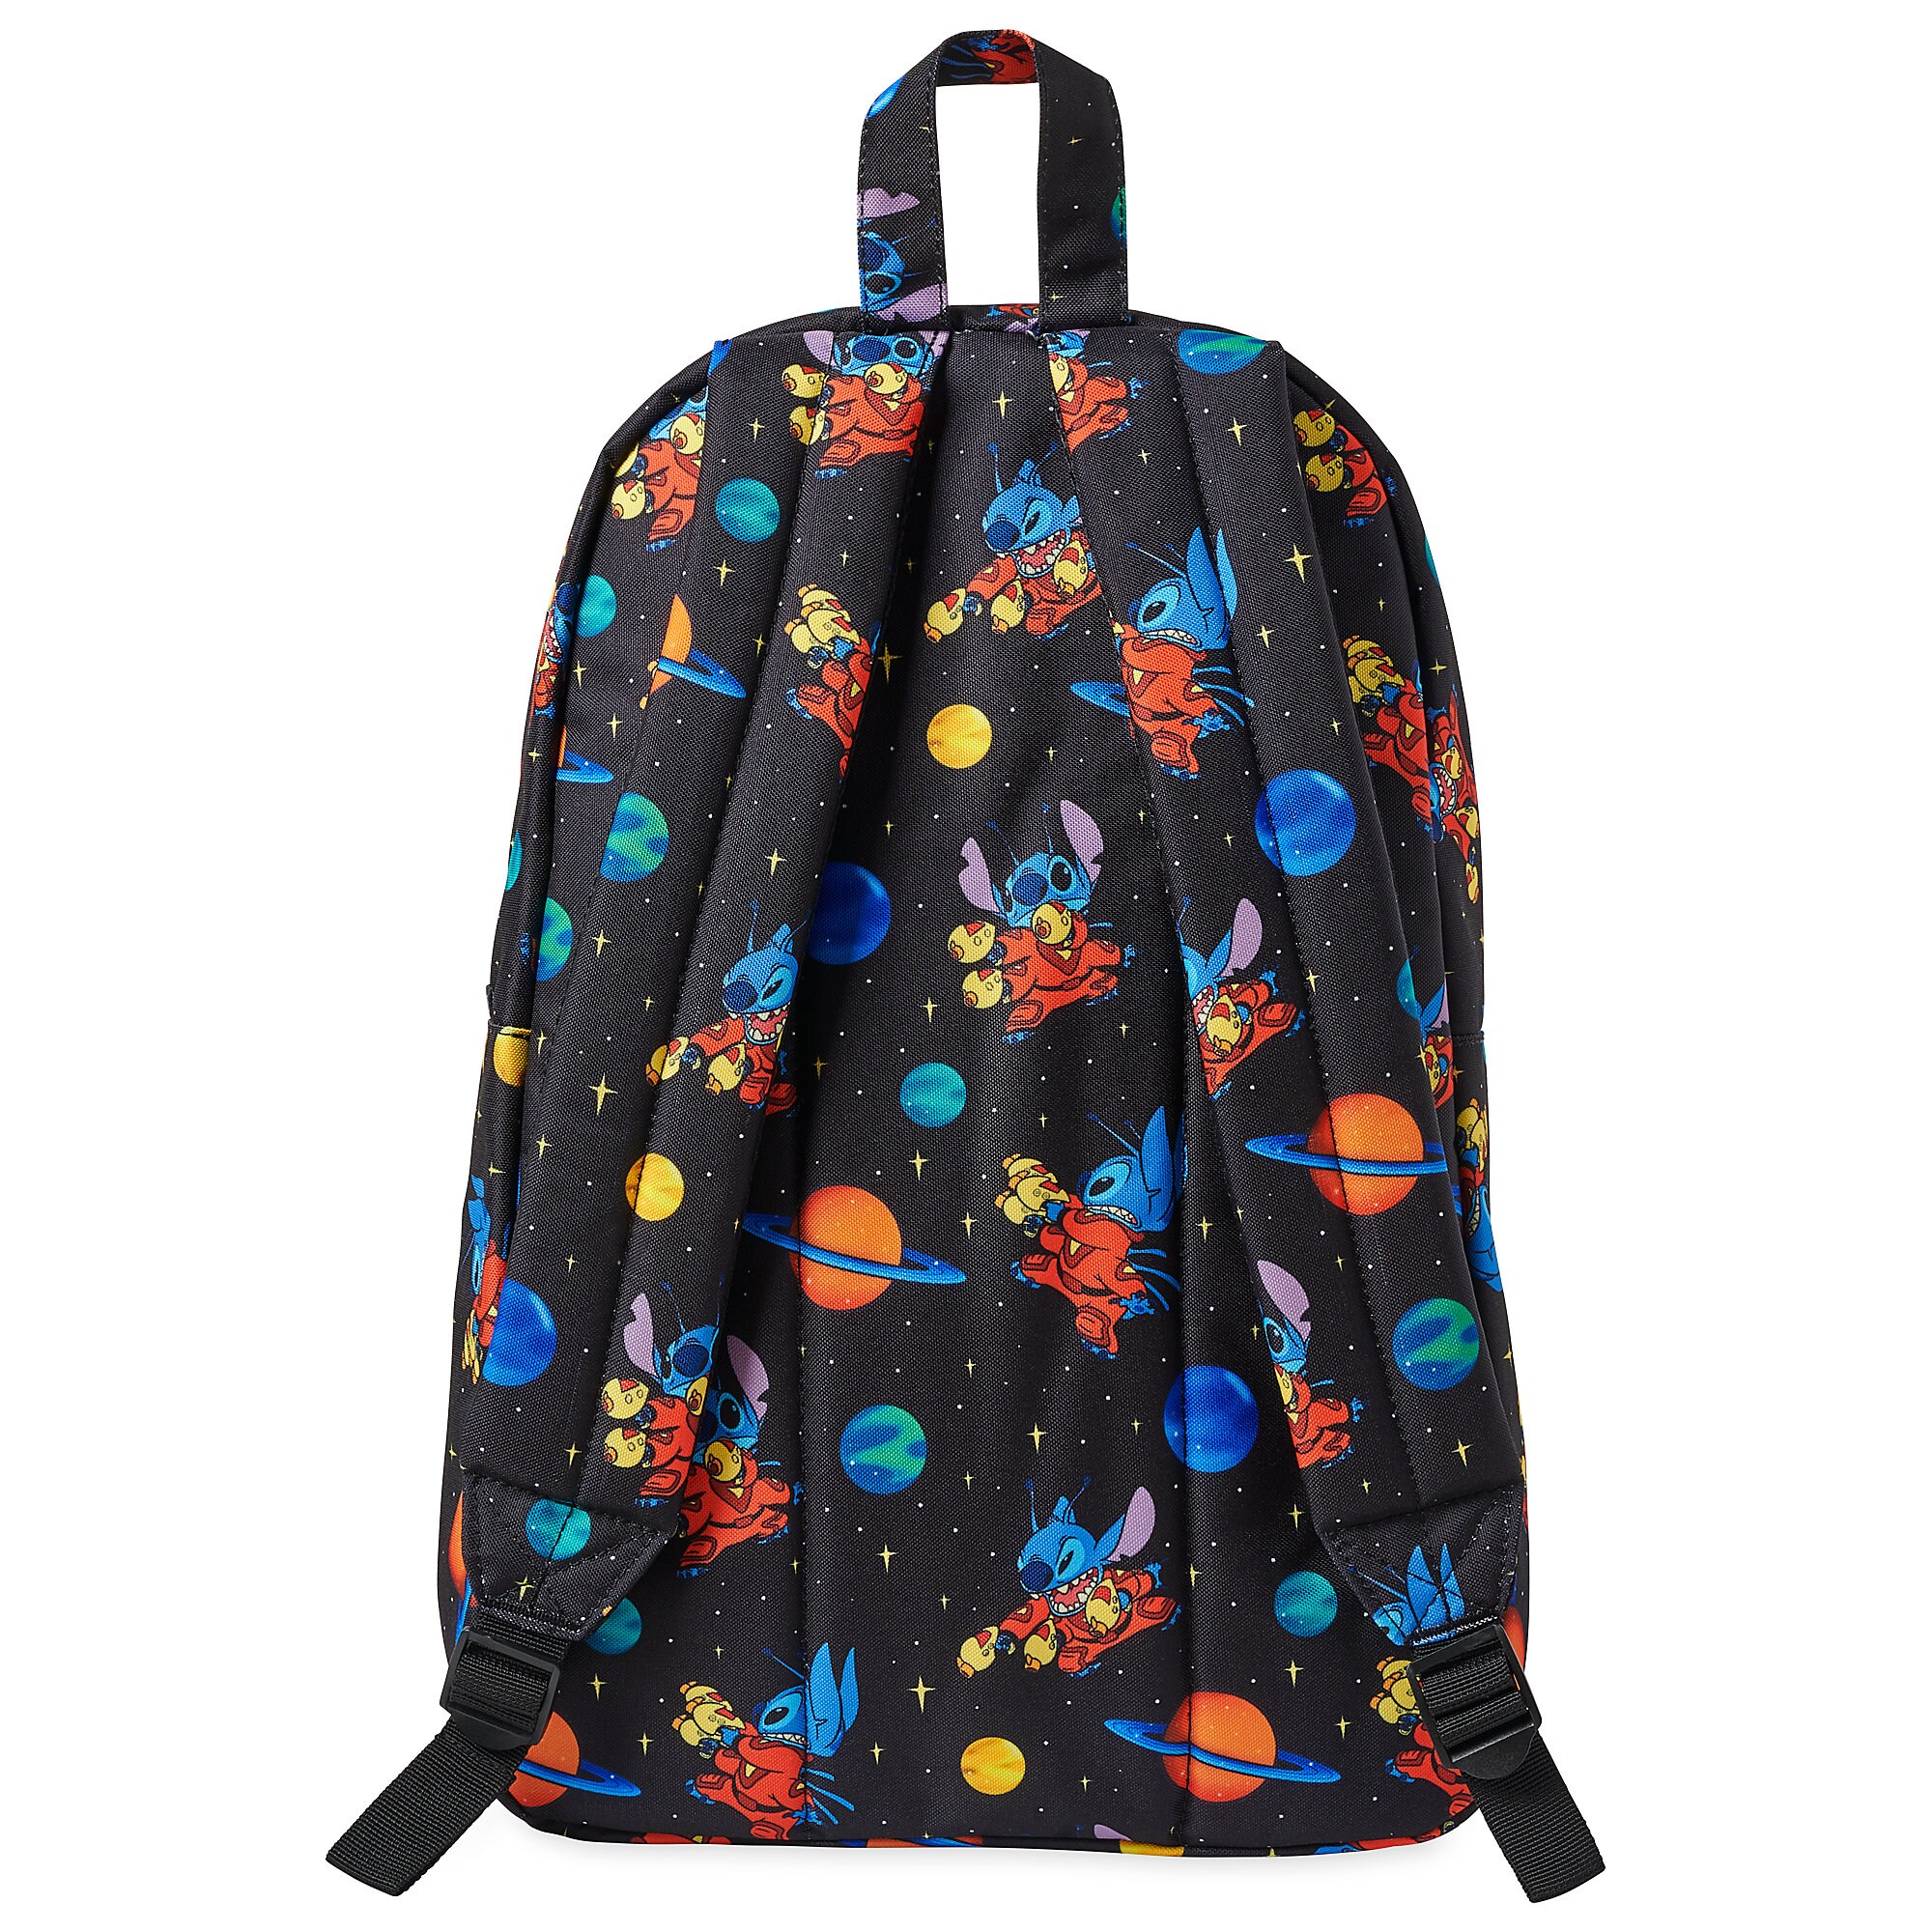 Stitch Backpack by Loungefly